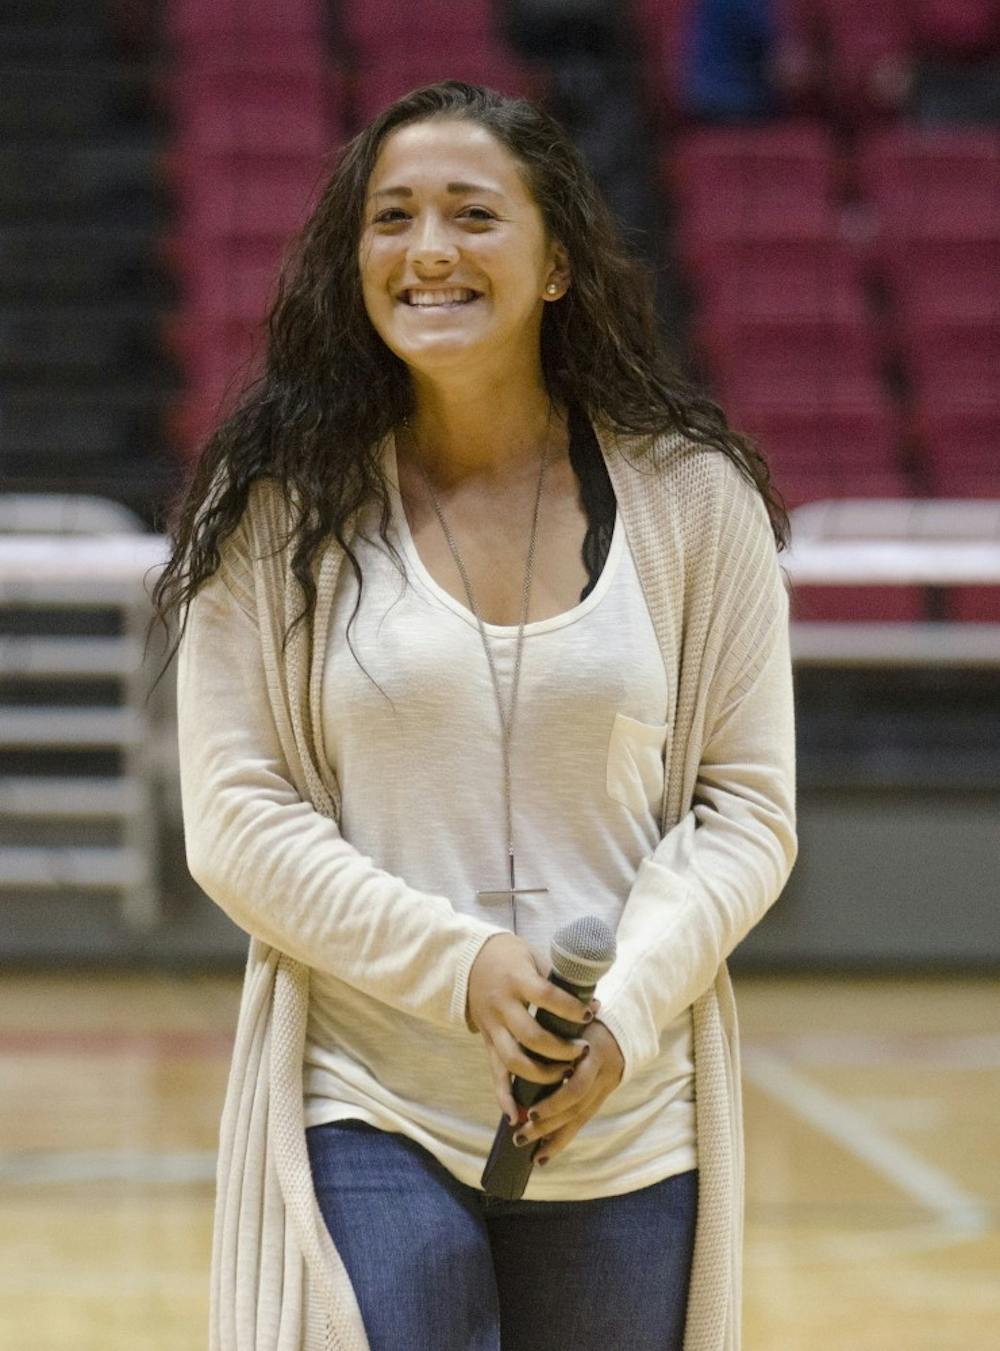 <p><strong>Lauren Hall</strong>, a sophomore midfielder for the Ball State soccer team, smiles after singing the National Anthem before the Women's Volleyball game on Oct. 5 at Worthen Arena. Hall sang in last year's Talent Search. <em>DN PHOTO BREANNA DAUGHERTY</em></p>